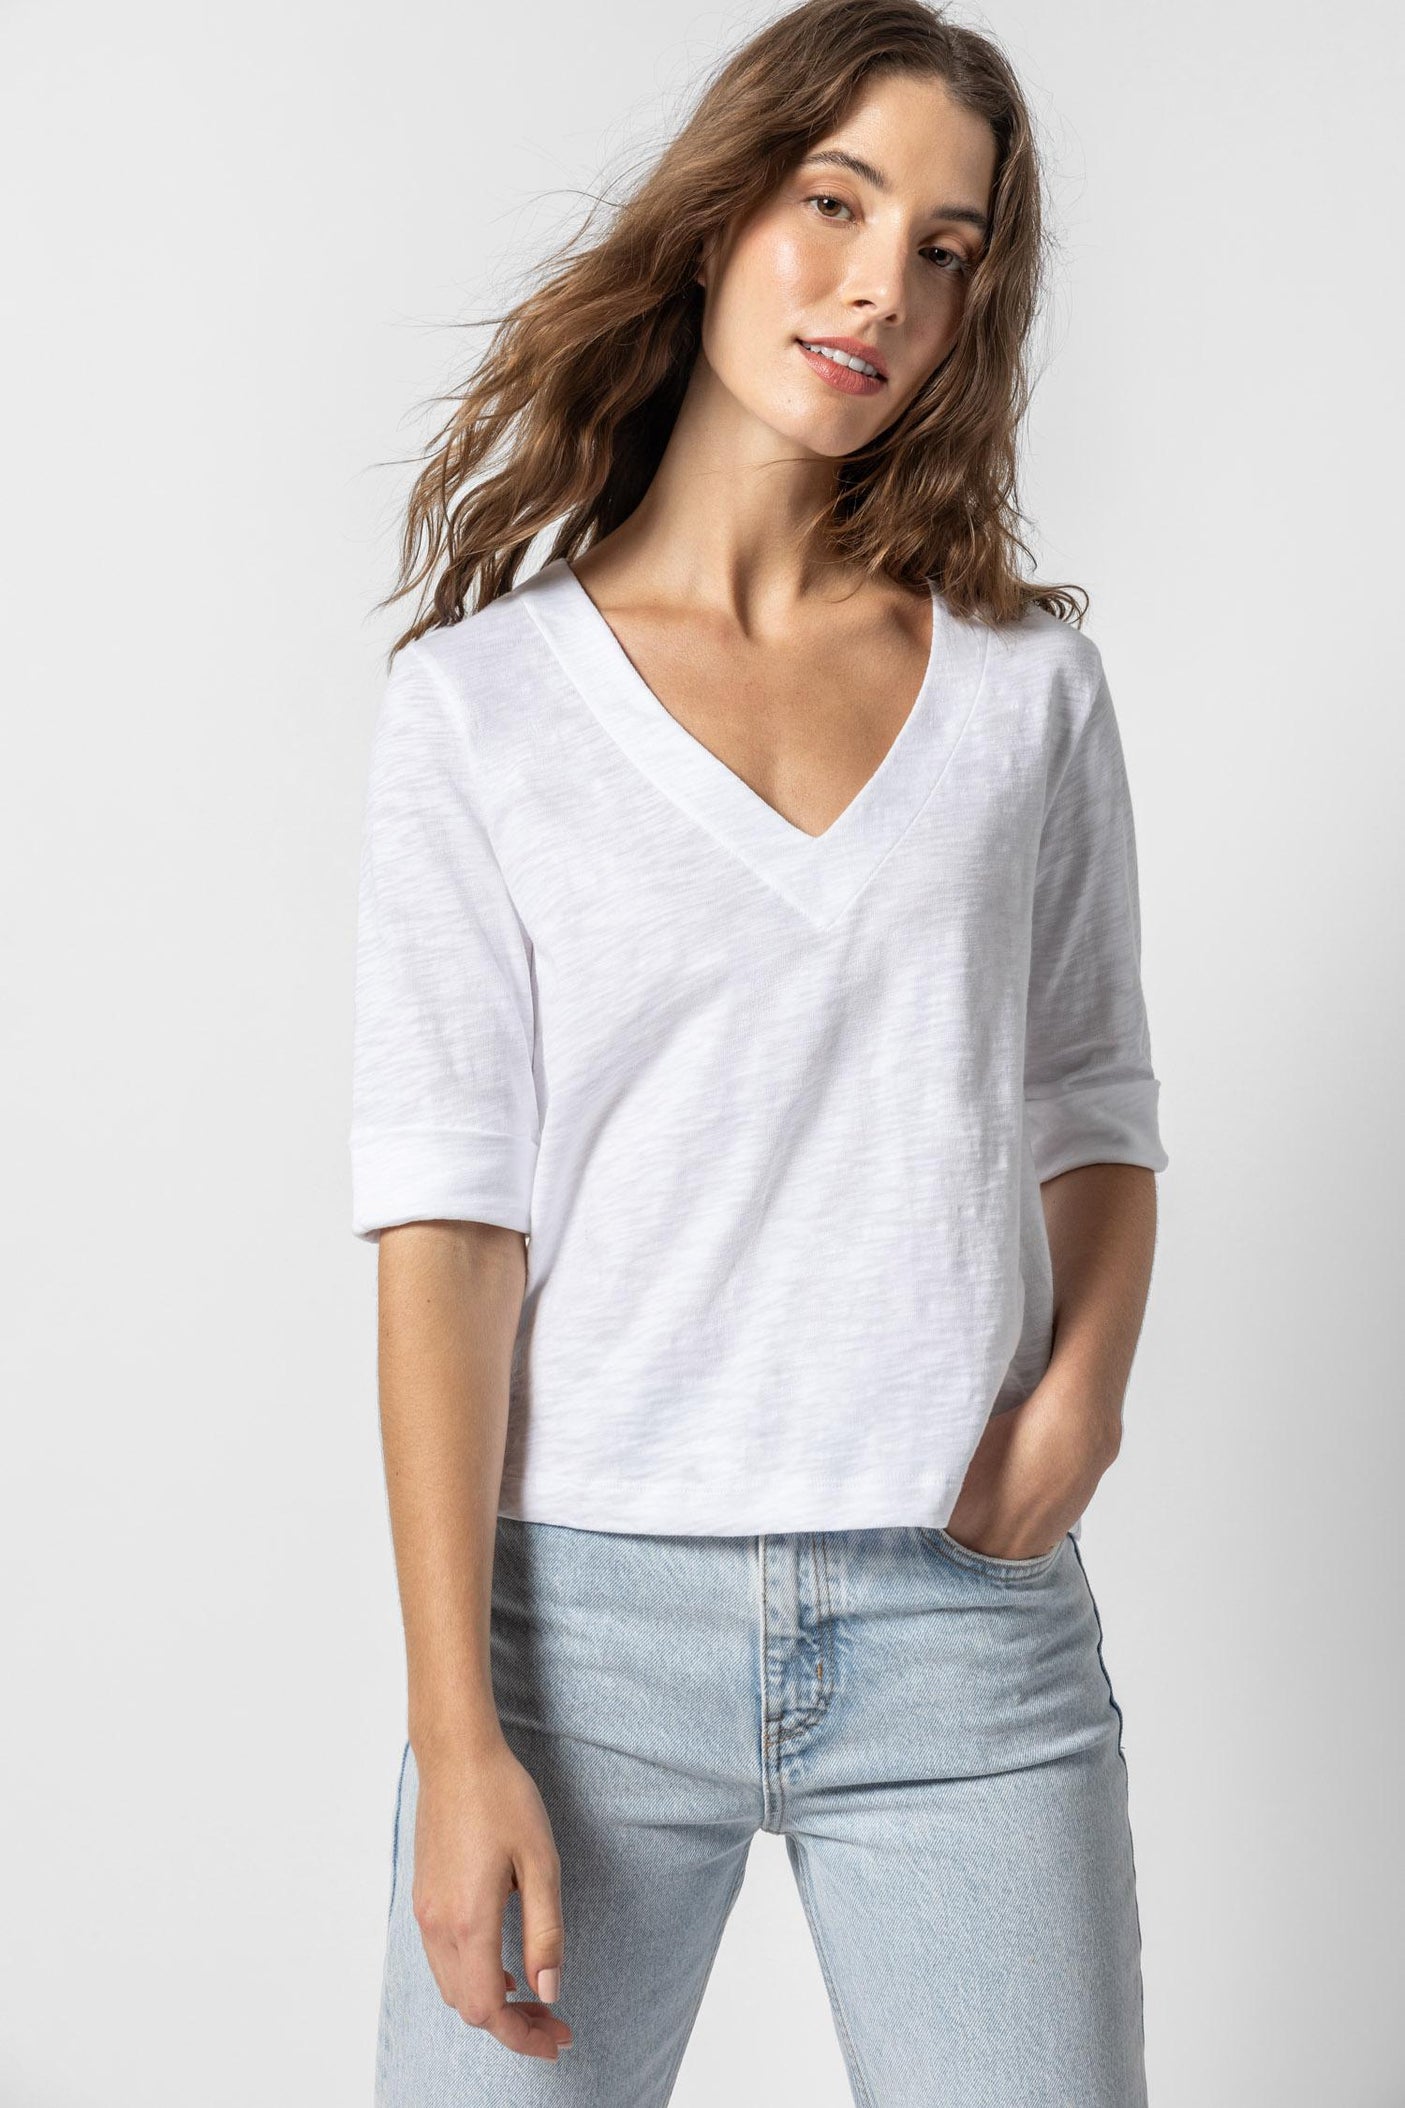 Cuffed Elbow Sleeve V-Neck in White